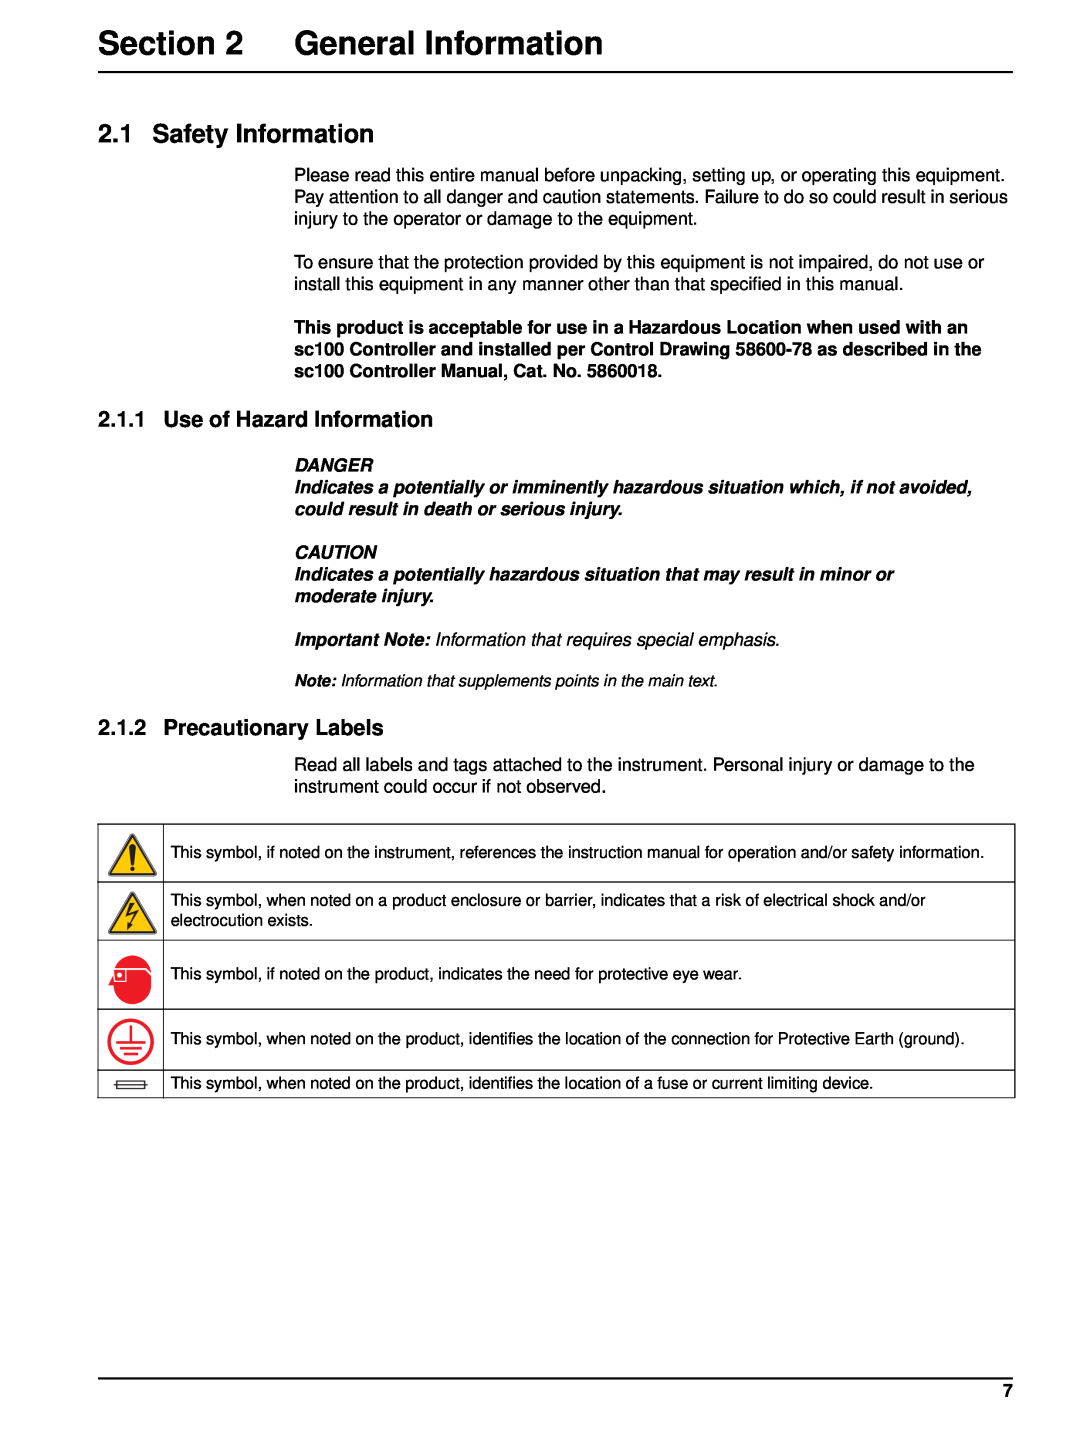 Hach 6120118 user manual General Information, Safety Information, Use of Hazard Information, Precautionary Labels 